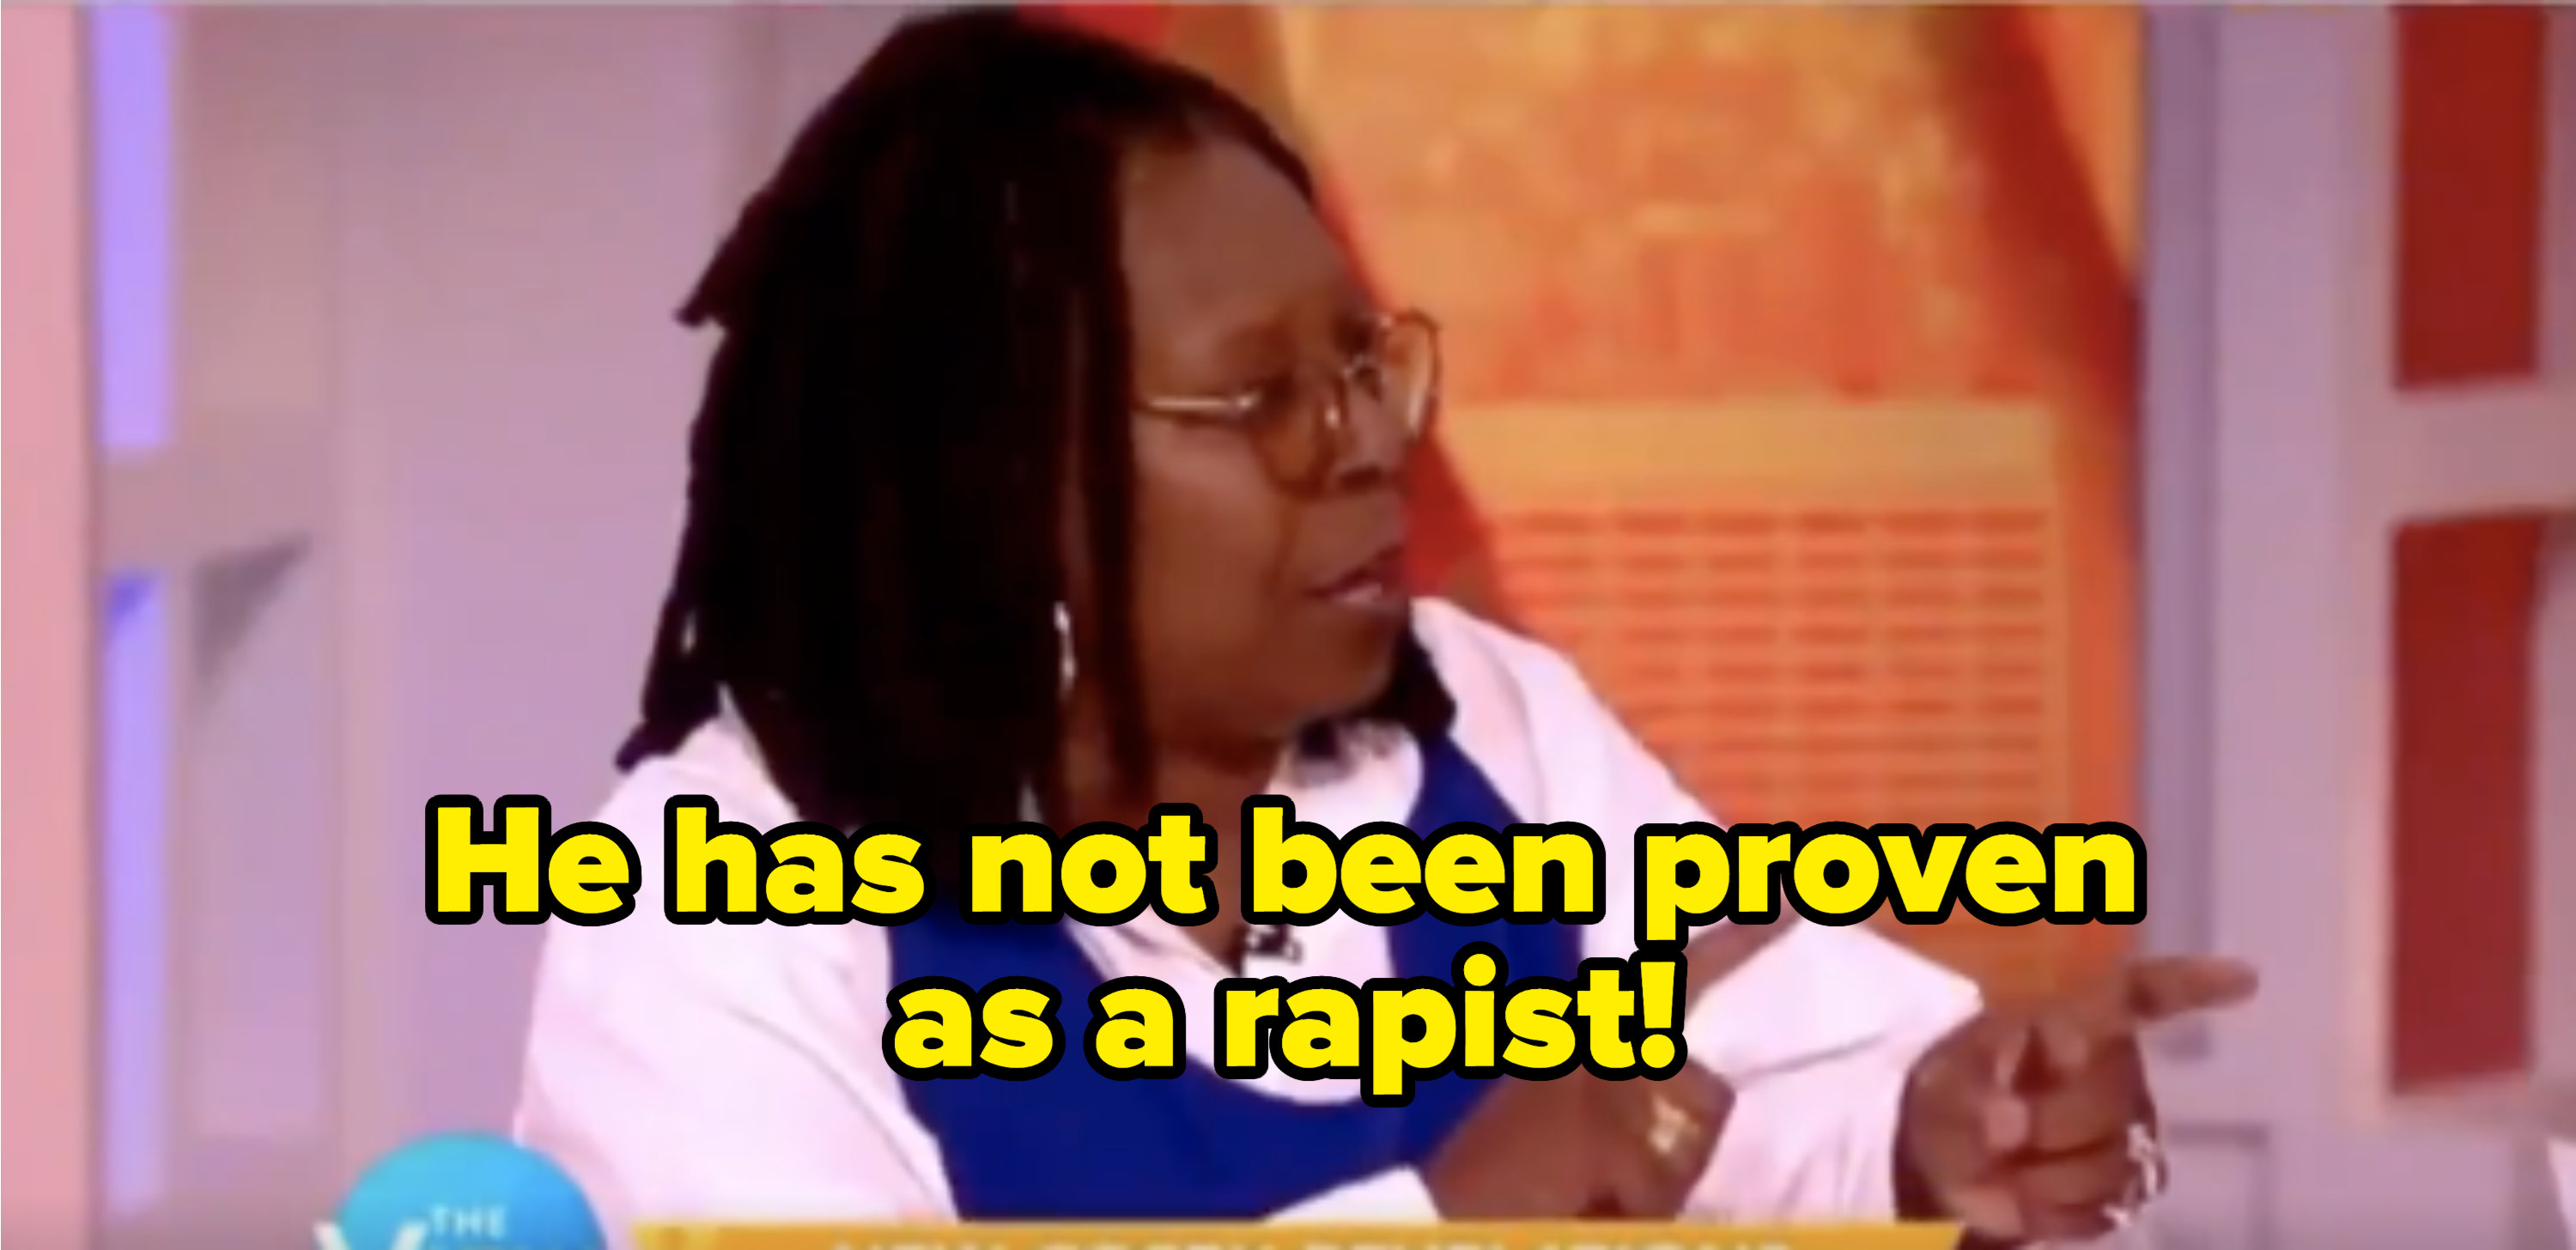 Whoopi saying &quot;He has not been proven as a rapist!&quot;